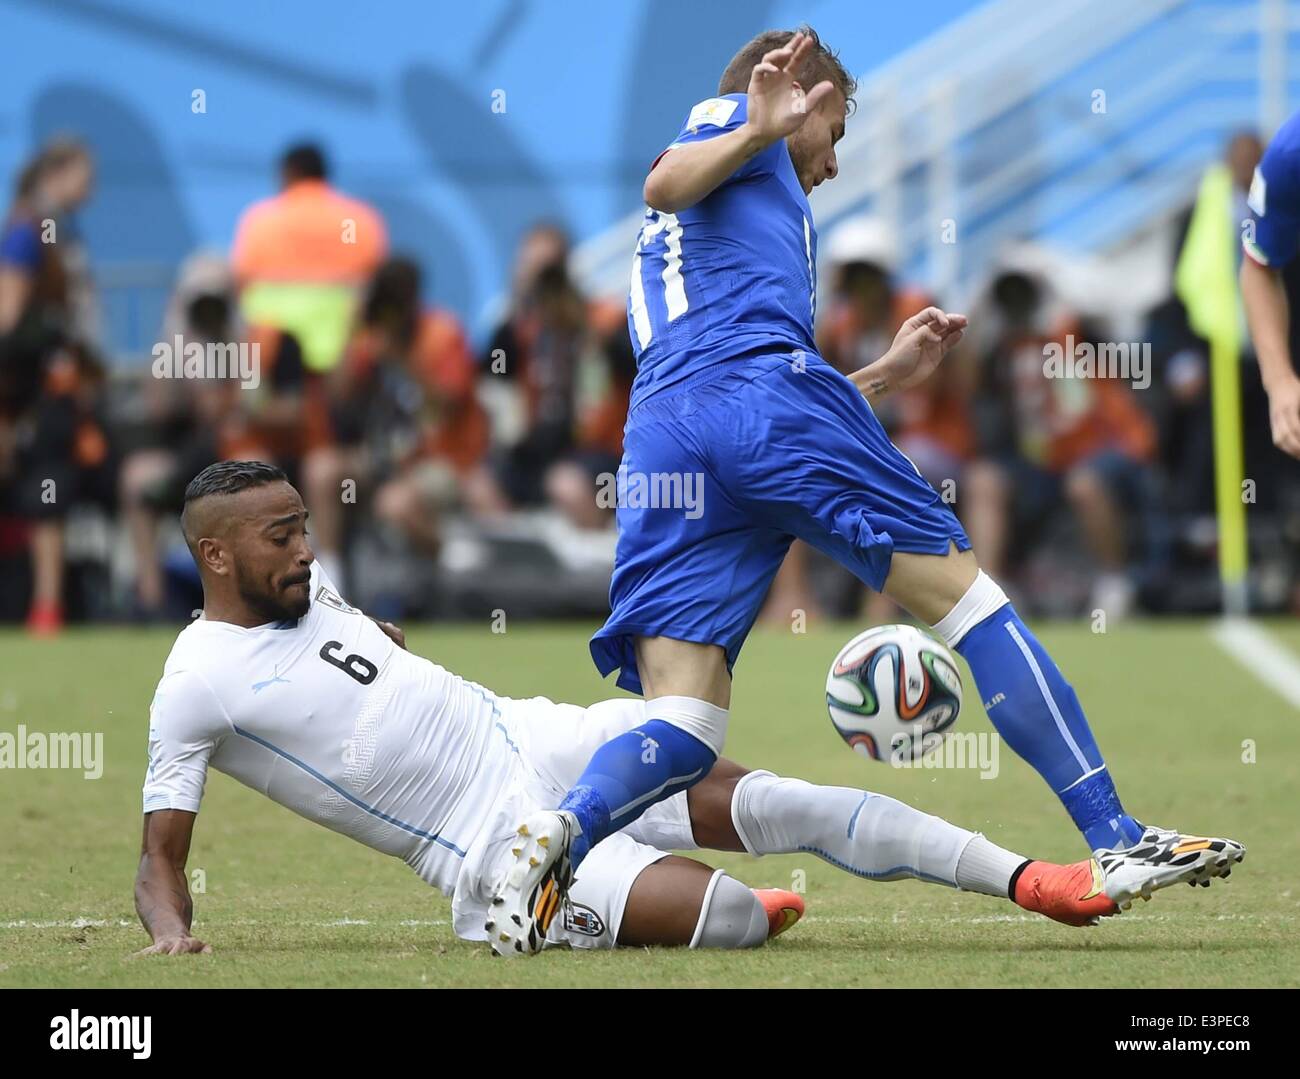 Natal, Brazil. 24th June, 2014. Italy's Ciro Immobile vies with Uruguay's Alvaro Pereira during a Group D match between Italy and Uruguay of 2014 FIFA World Cup at the Estadio das Dunas Stadium in Natal, Brazil, June 24, 2014. © Lui Siu Wai/Xinhua/Alamy Live News Stock Photo